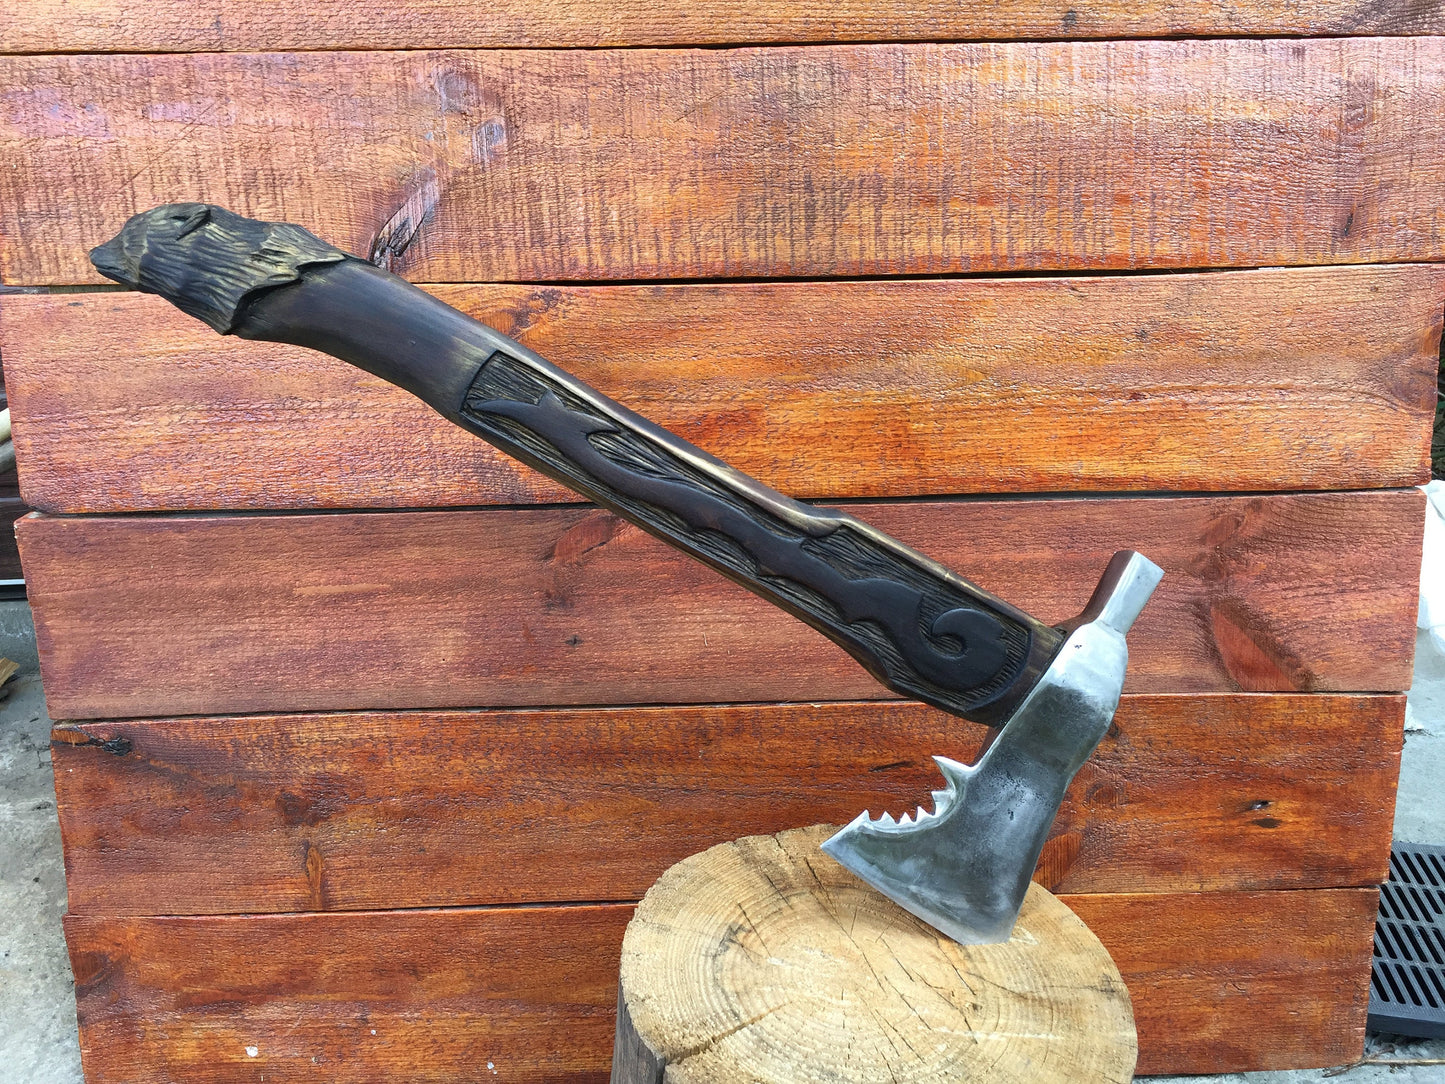 Medieval axe, viking axe, iron gift for him, tomahawk, hatchet, hiking, hunting, mens gifts, chopping axe, gifts for men, manly iron gifts